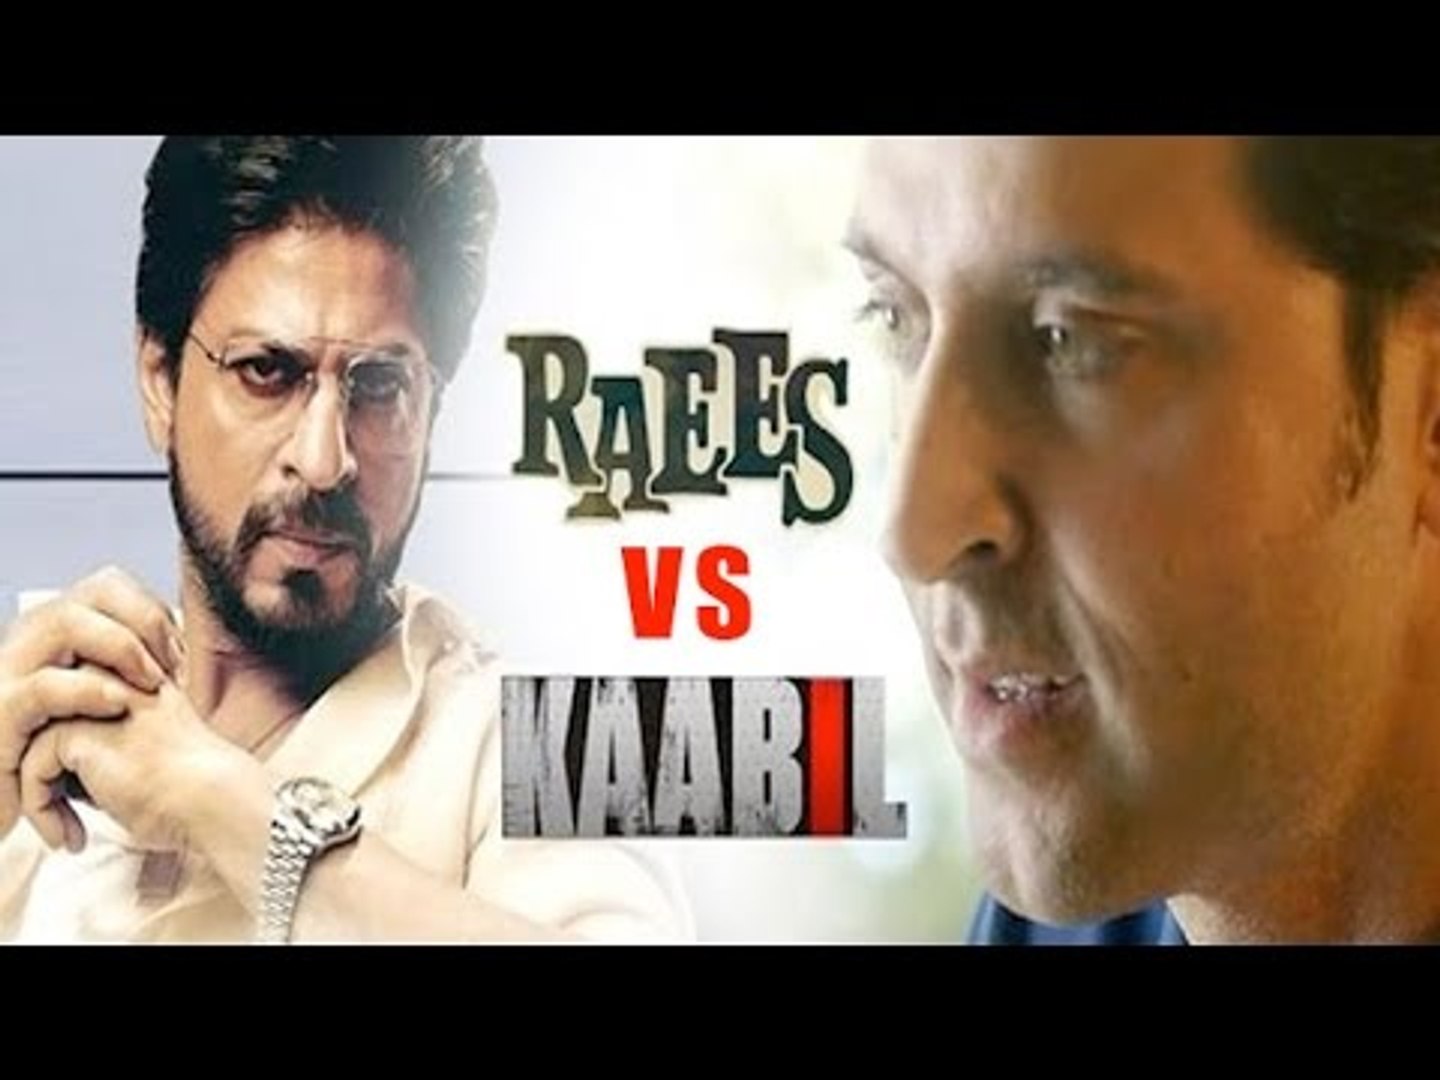 Raees vs Kaabil: Going by history, it's advantage Shah Rukh Khan in this  clash